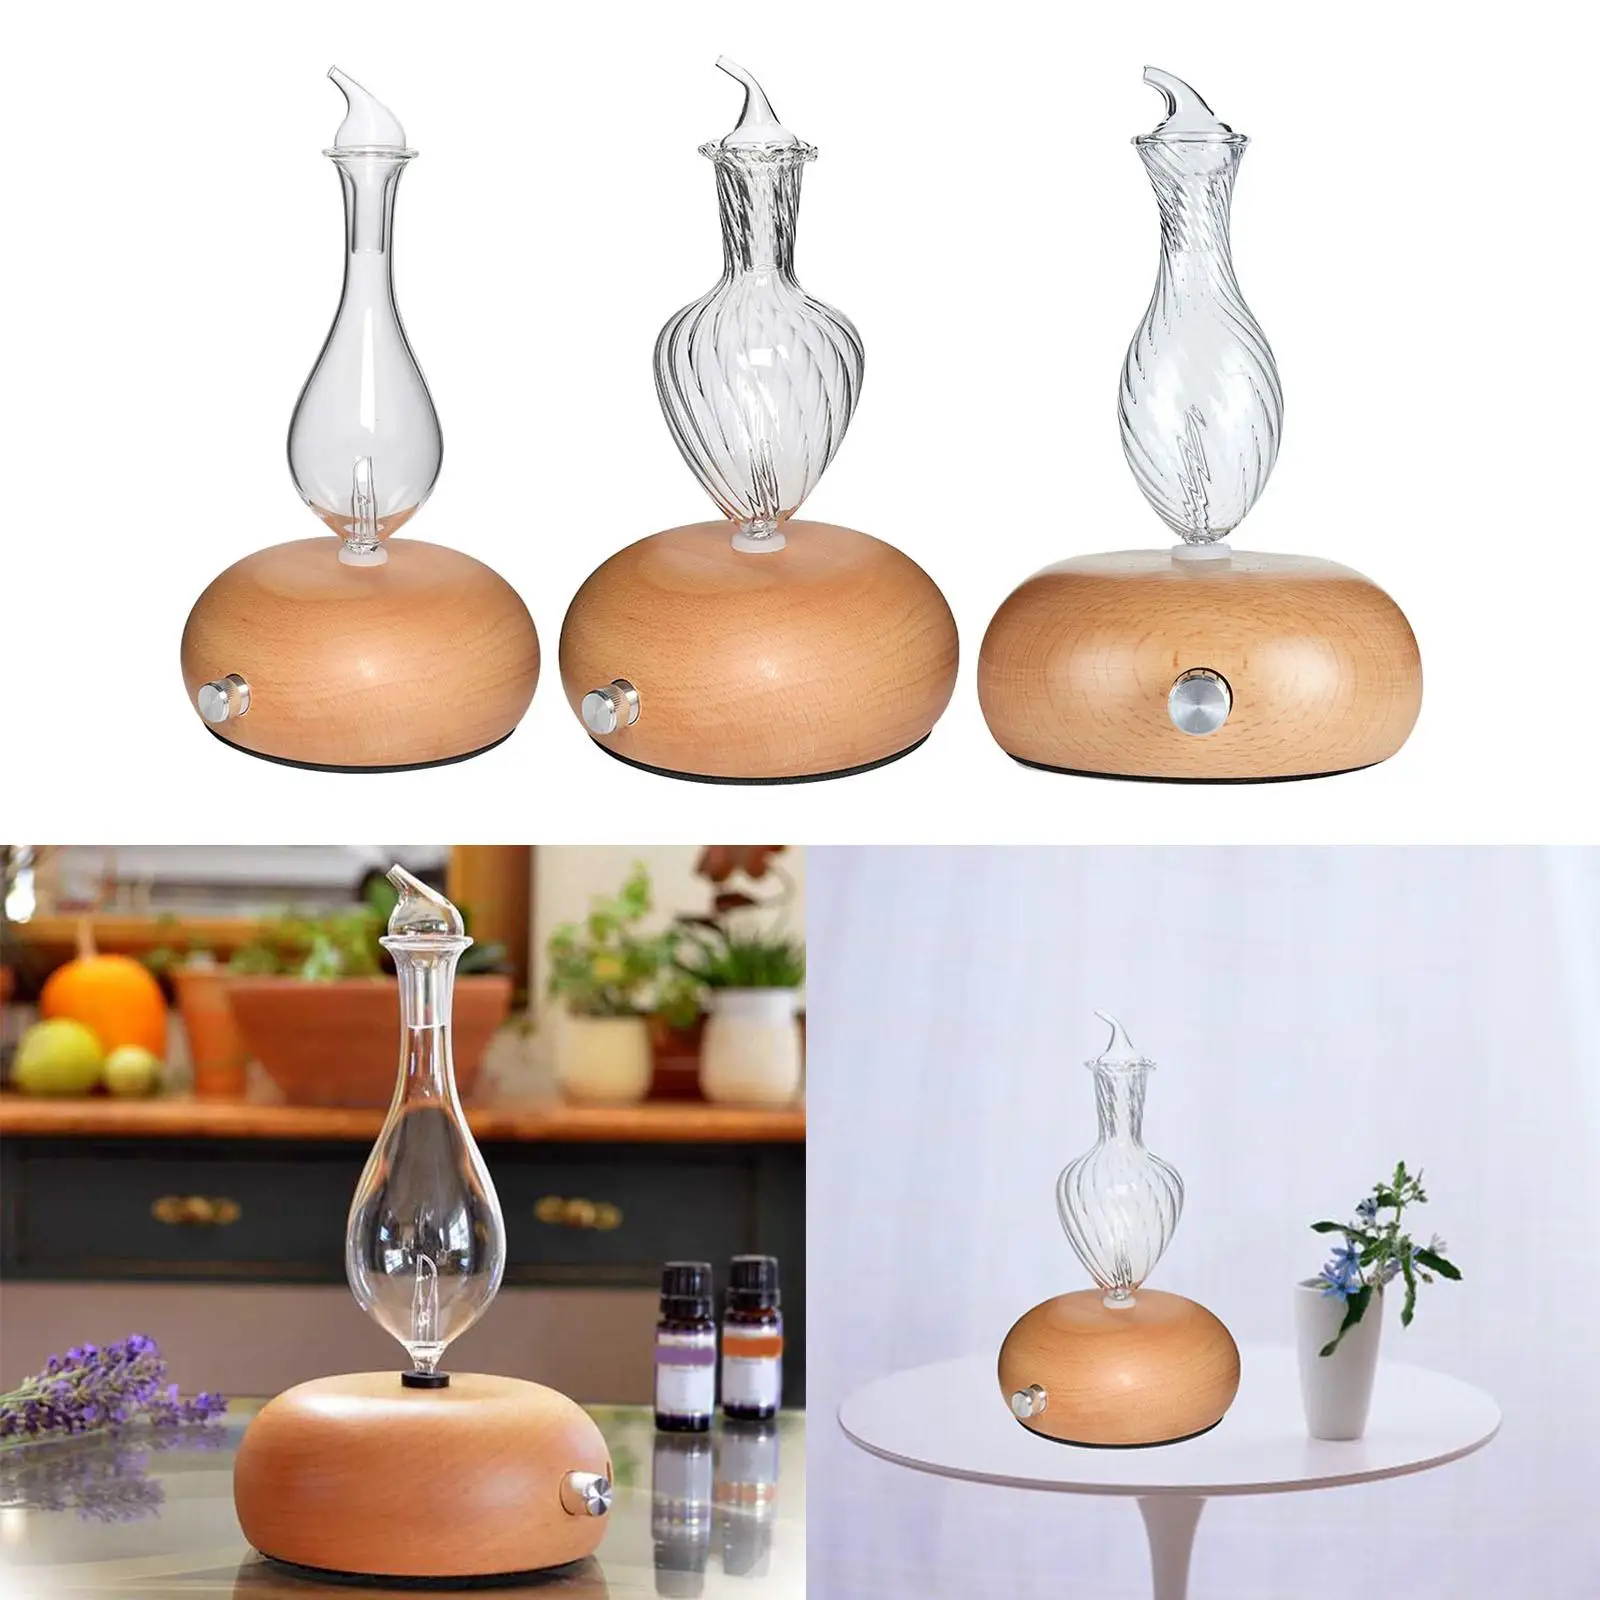 Waterless Nebulizing Essential Oil Diffuser Cool Mist Aroma Air Humidifier Vaporizer Night Light for SPA Bedroom